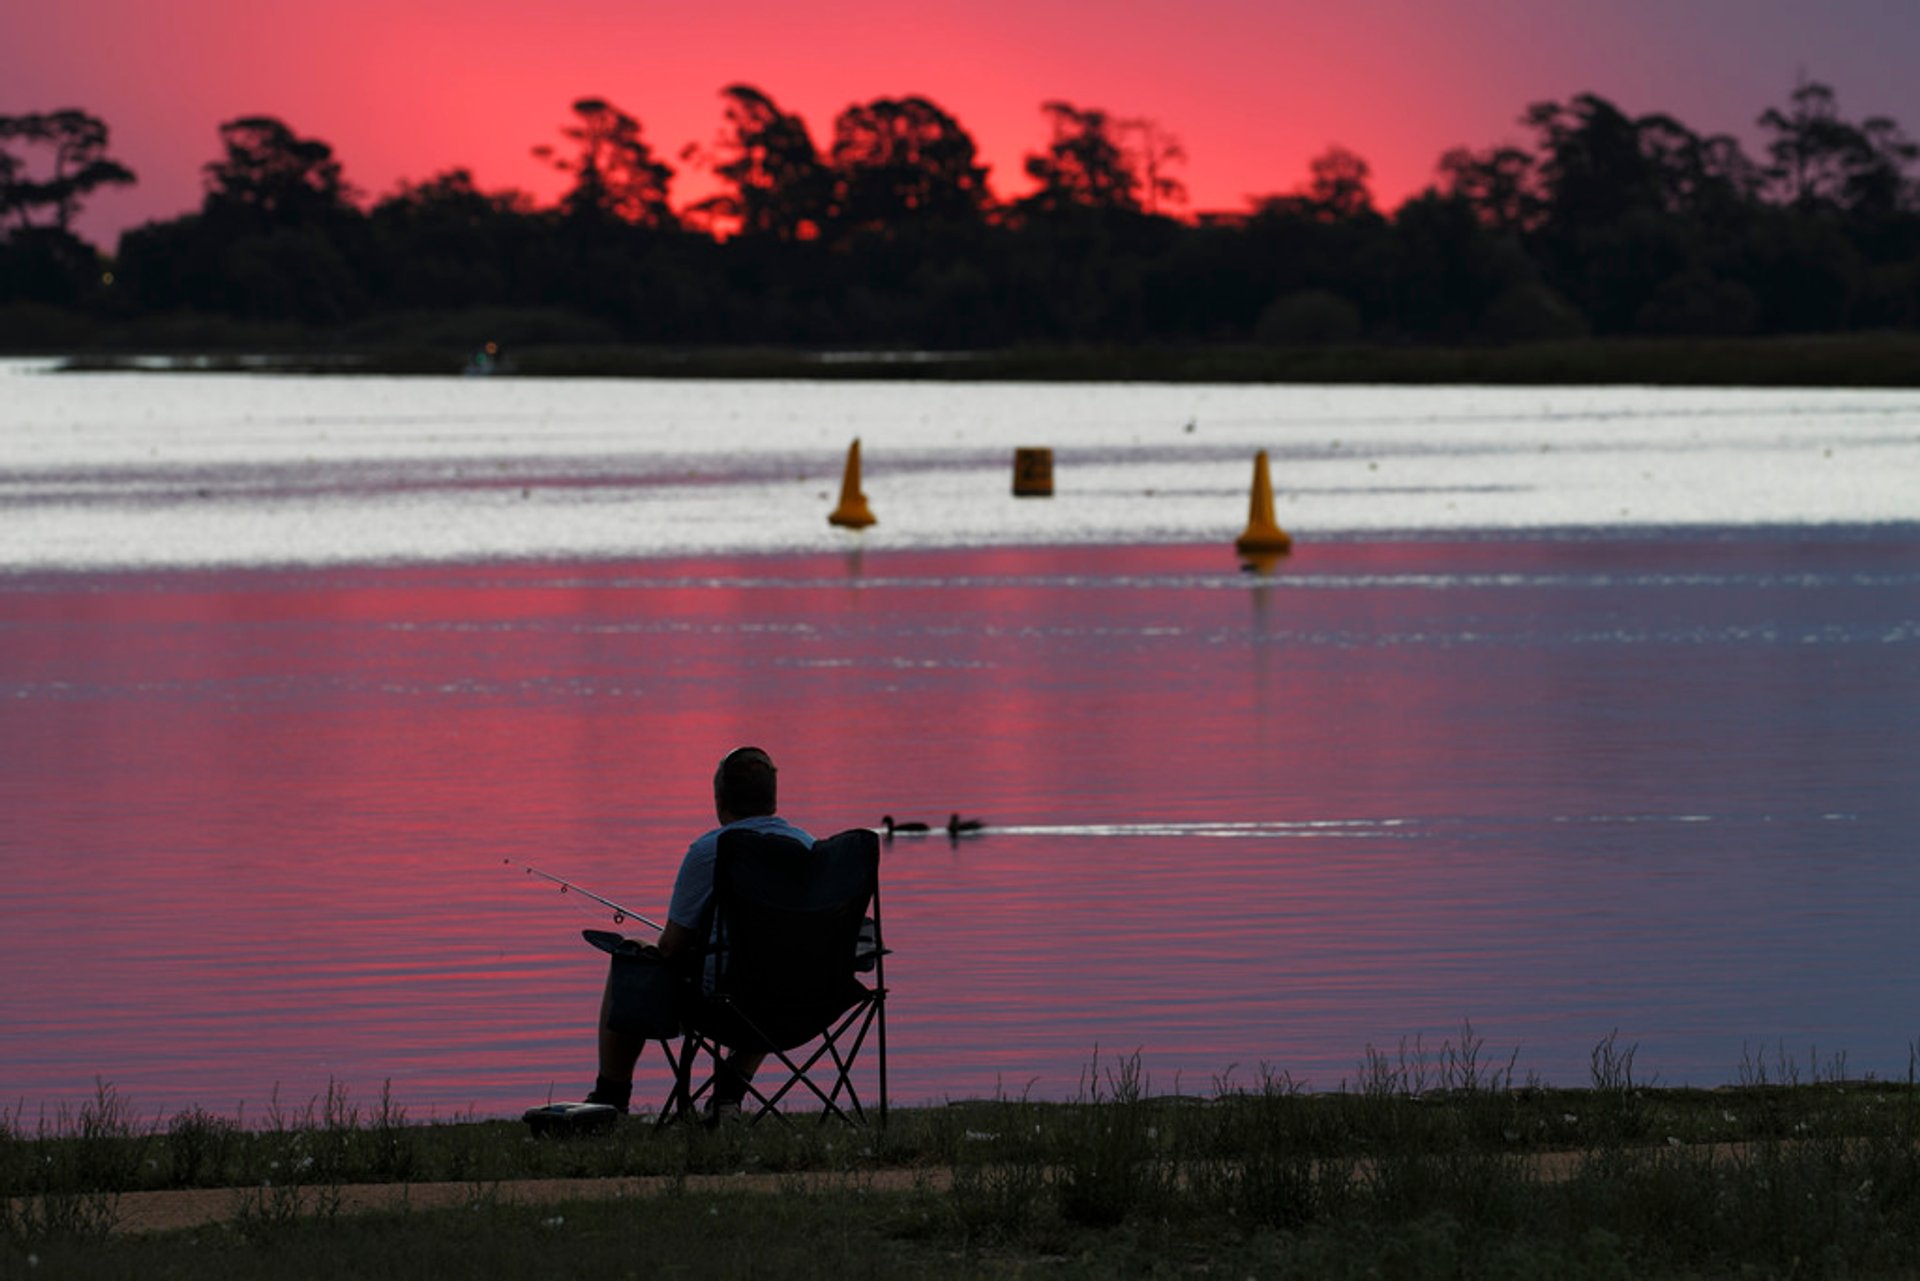 Fishing in the Gippsland Region